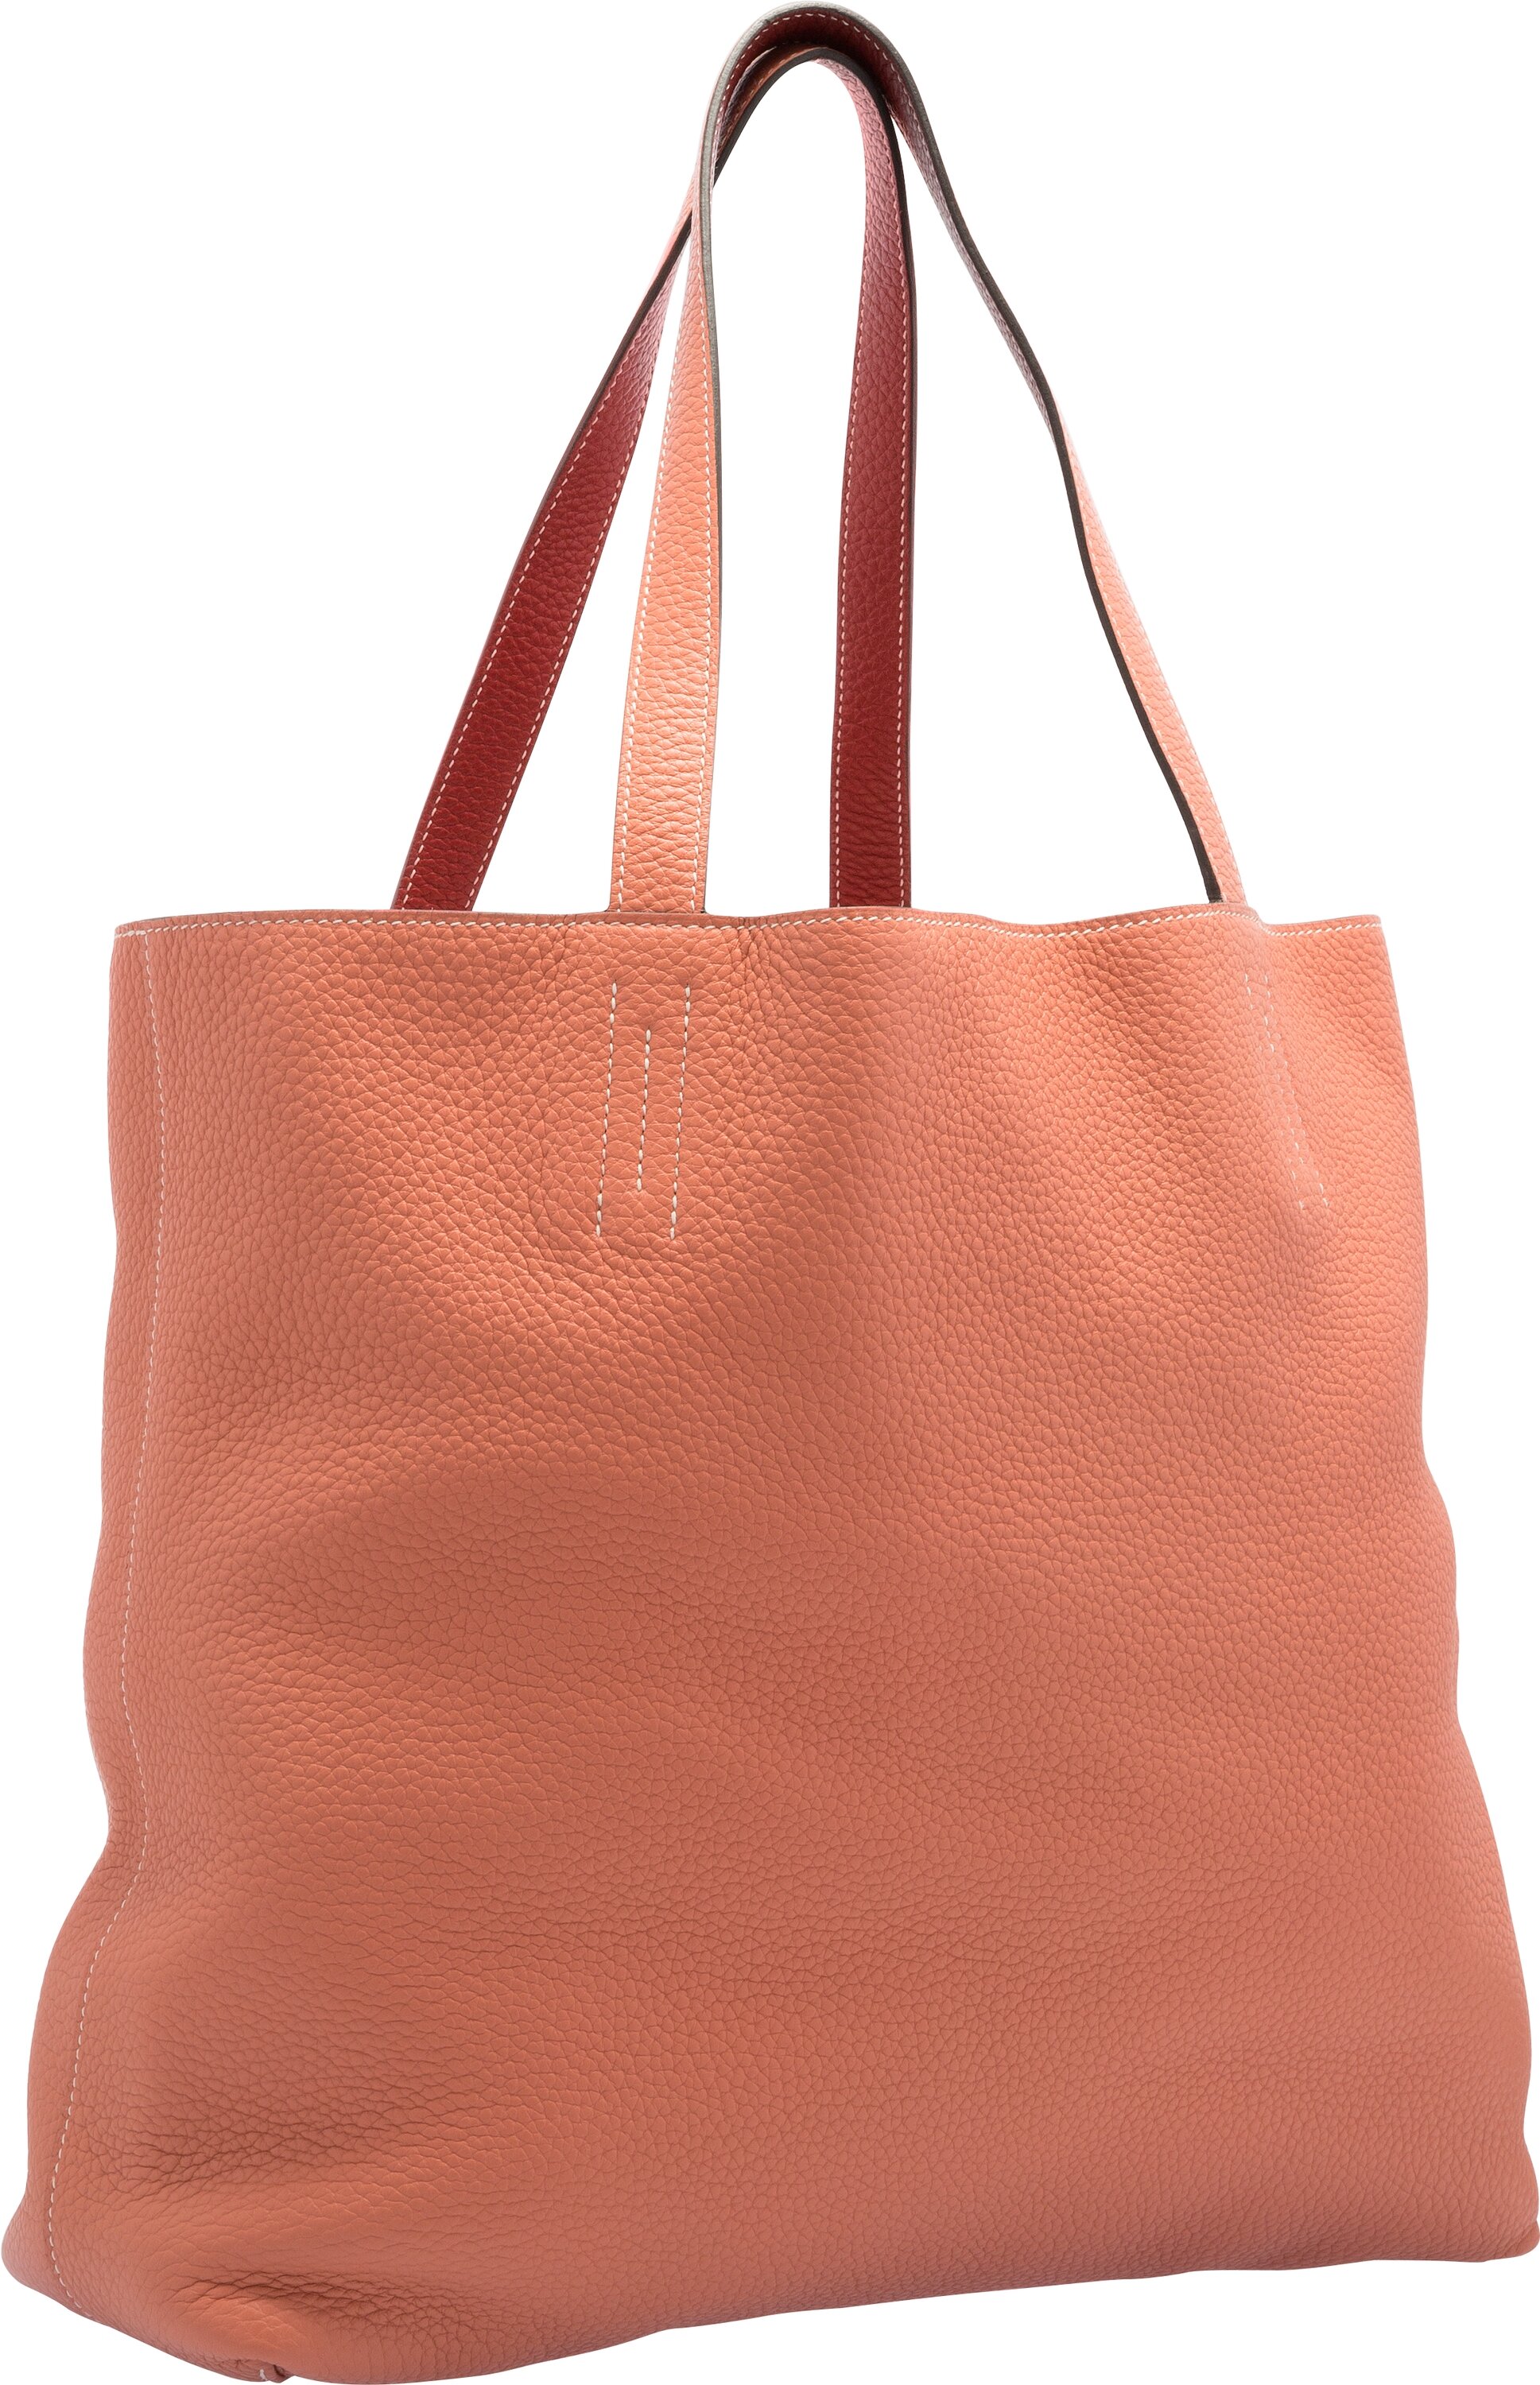 HERMES Clemence Leather Double Sens Tote Bag Brown/Orange